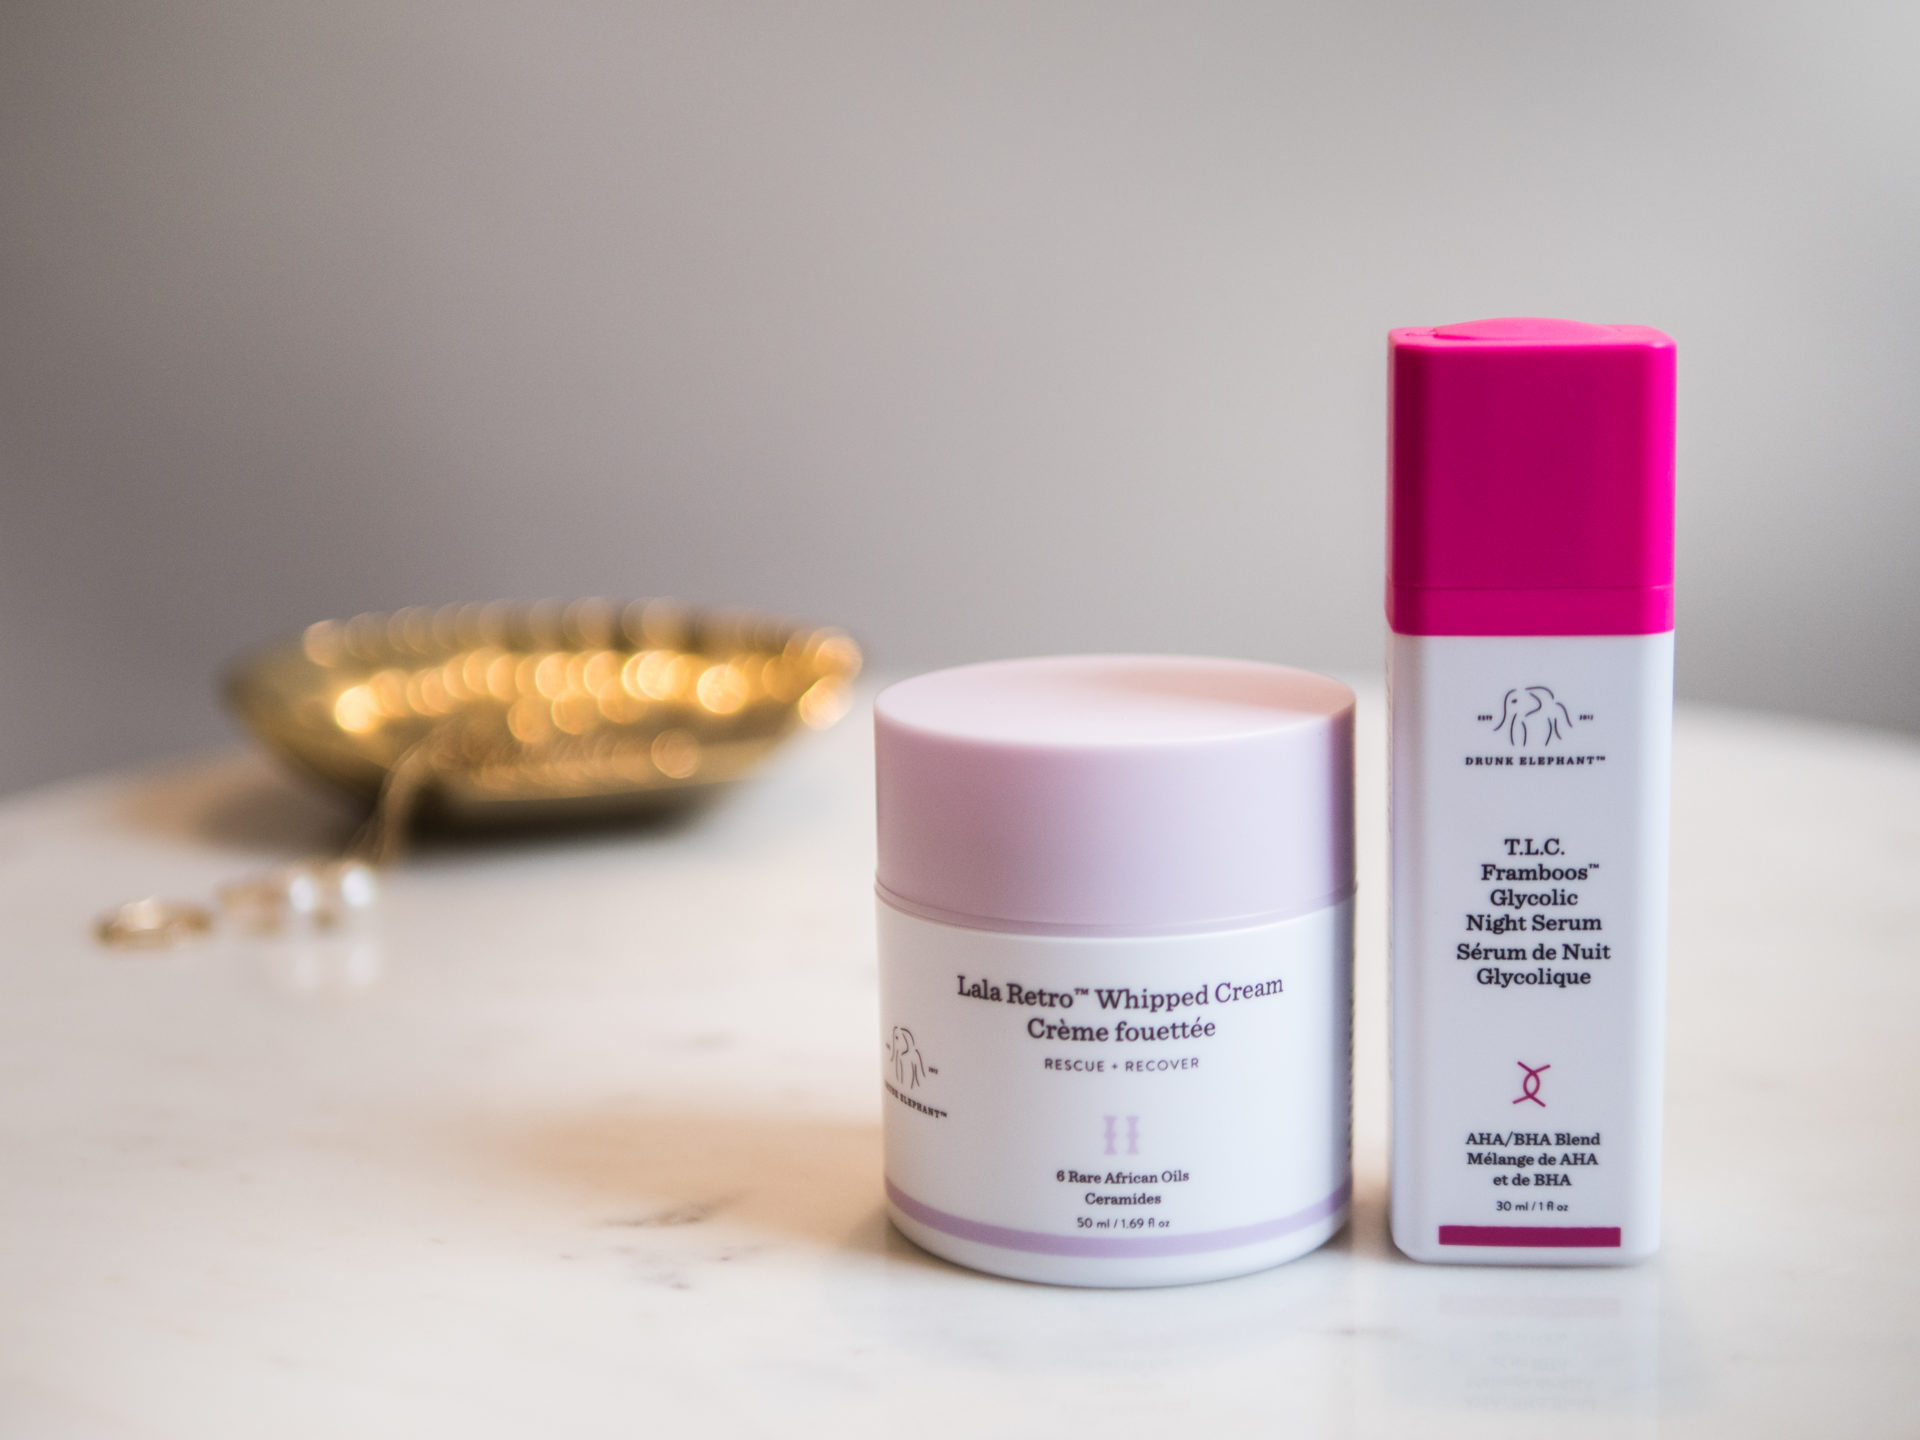 Drunk Elephant products review: Whipped Cream and Night Serum — POPSHION